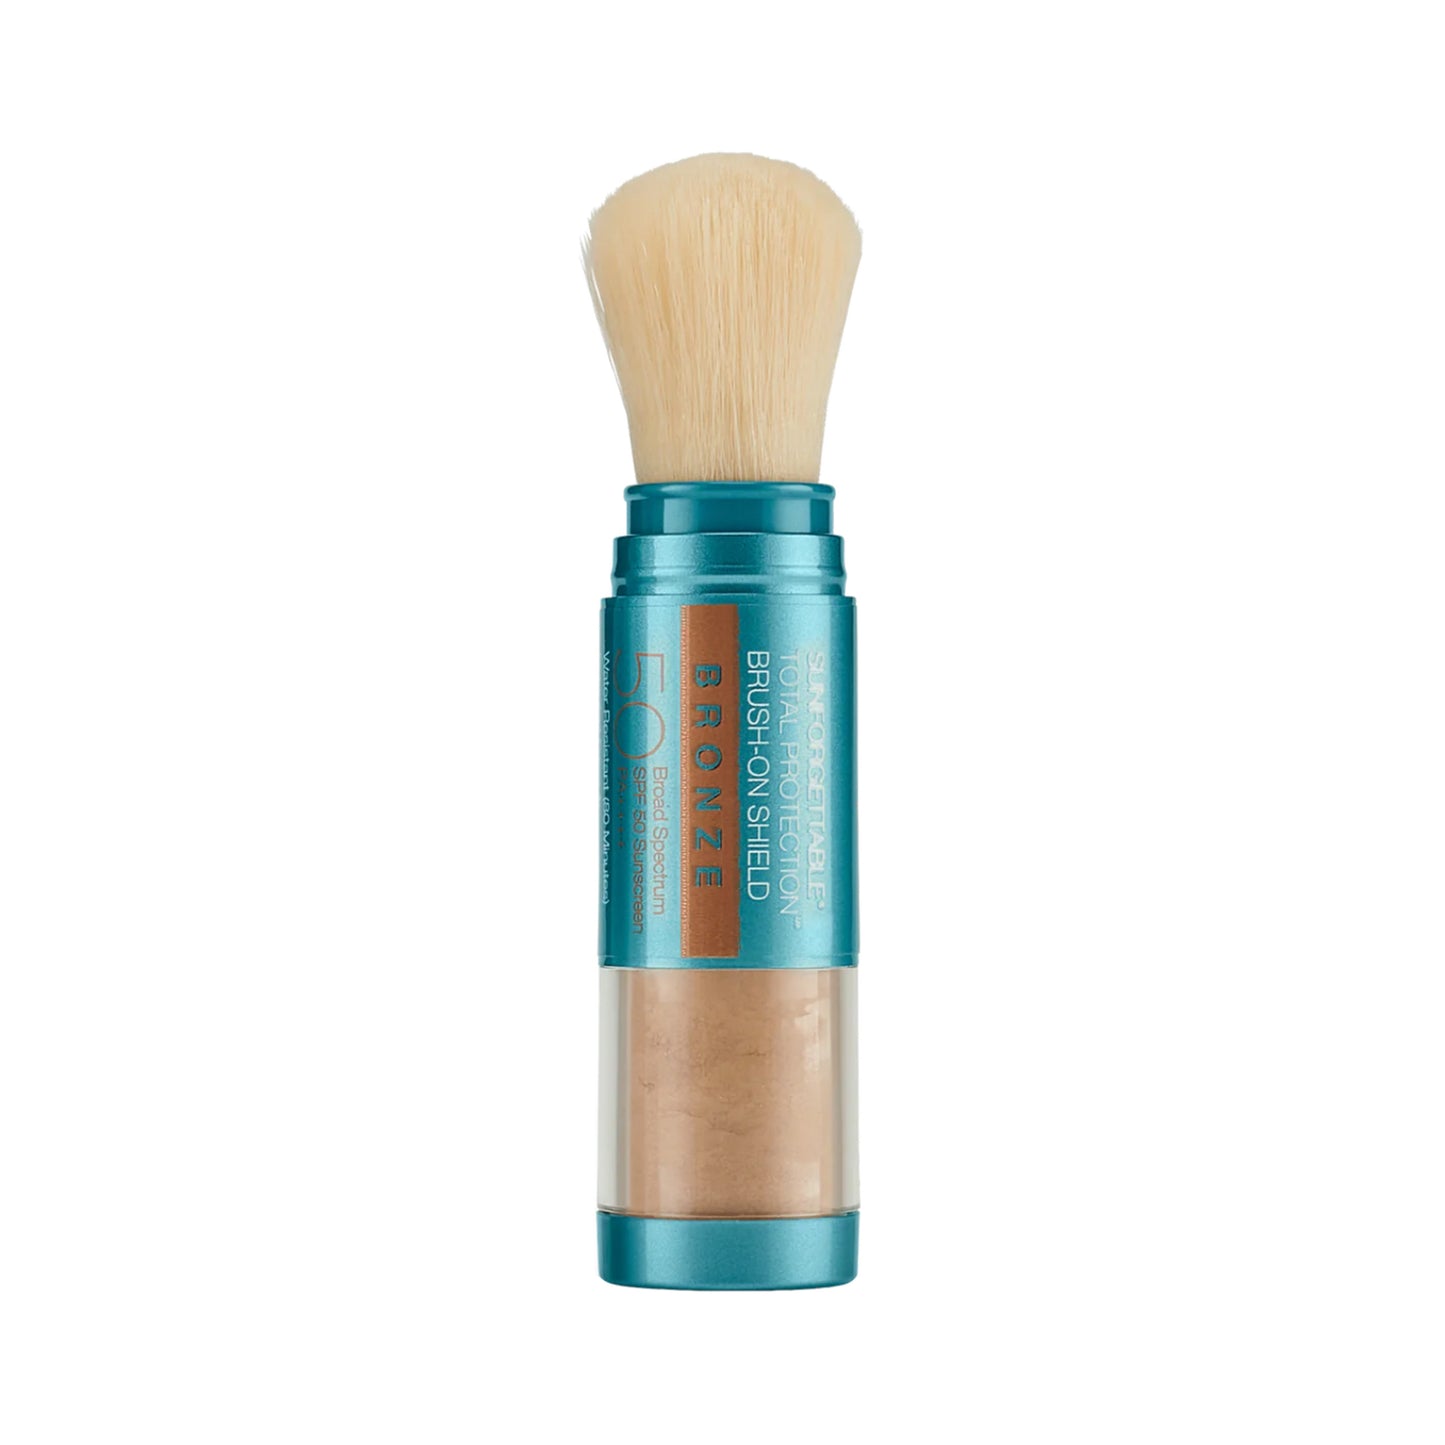 Colorescience Sunforgettable Total Protection™ Brush-On Shield SPF 50